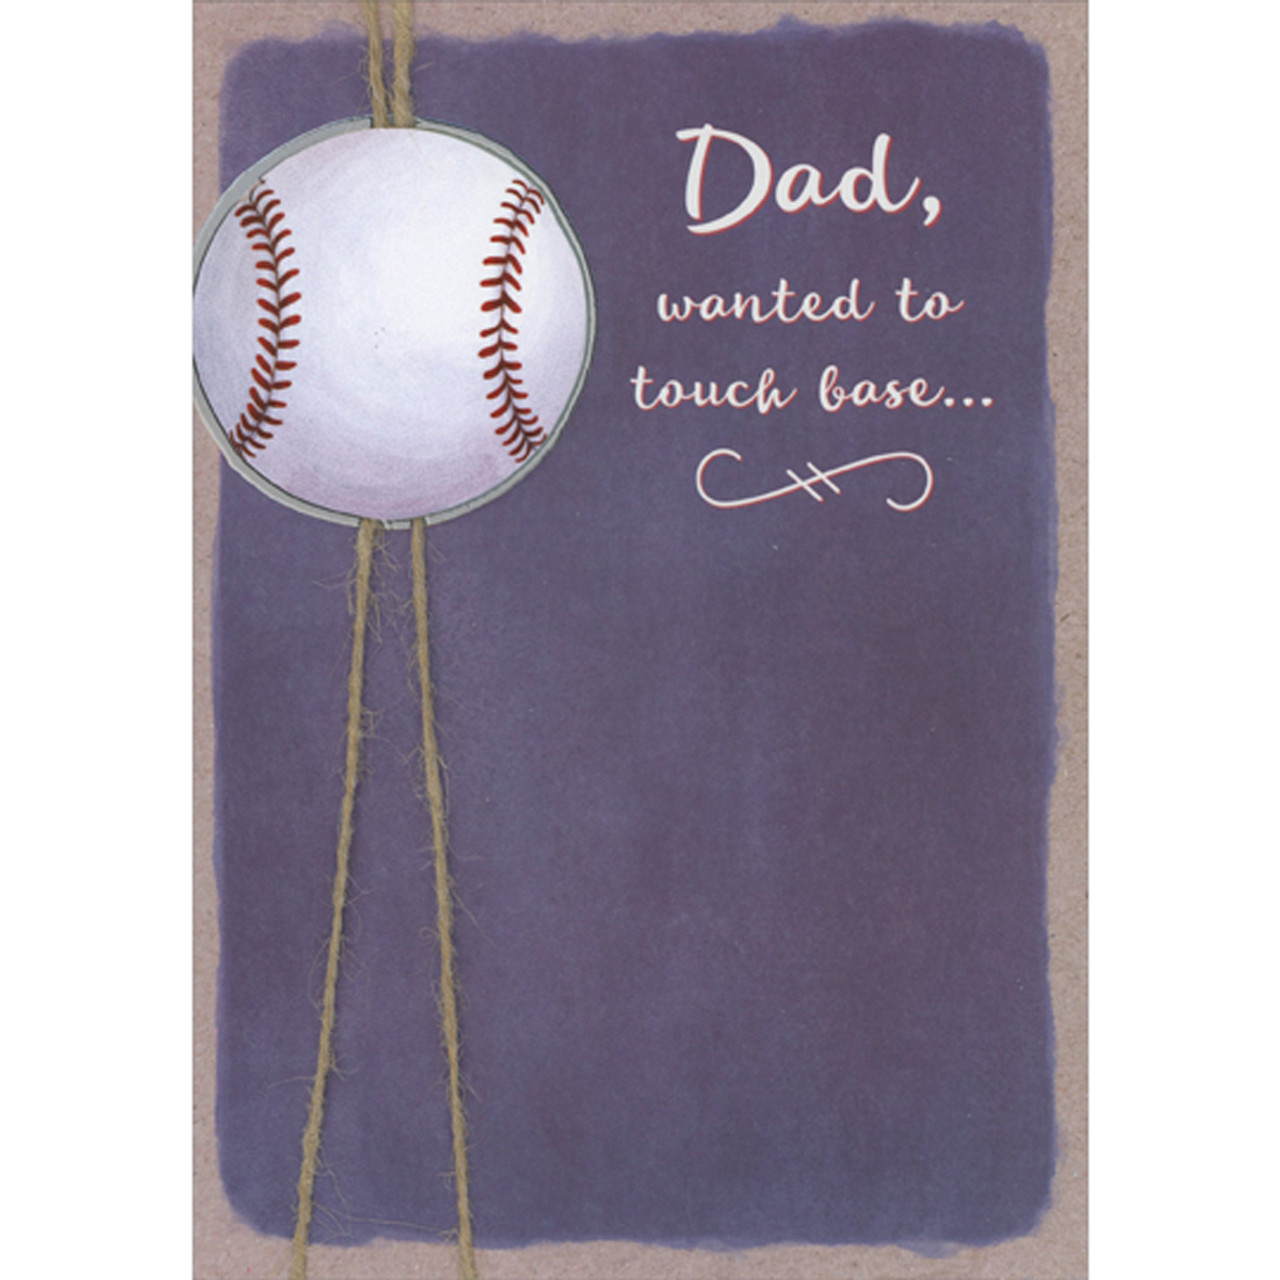 Dad, Wanted to Touch Base: 3D Die Cut Baseball Over Brown String